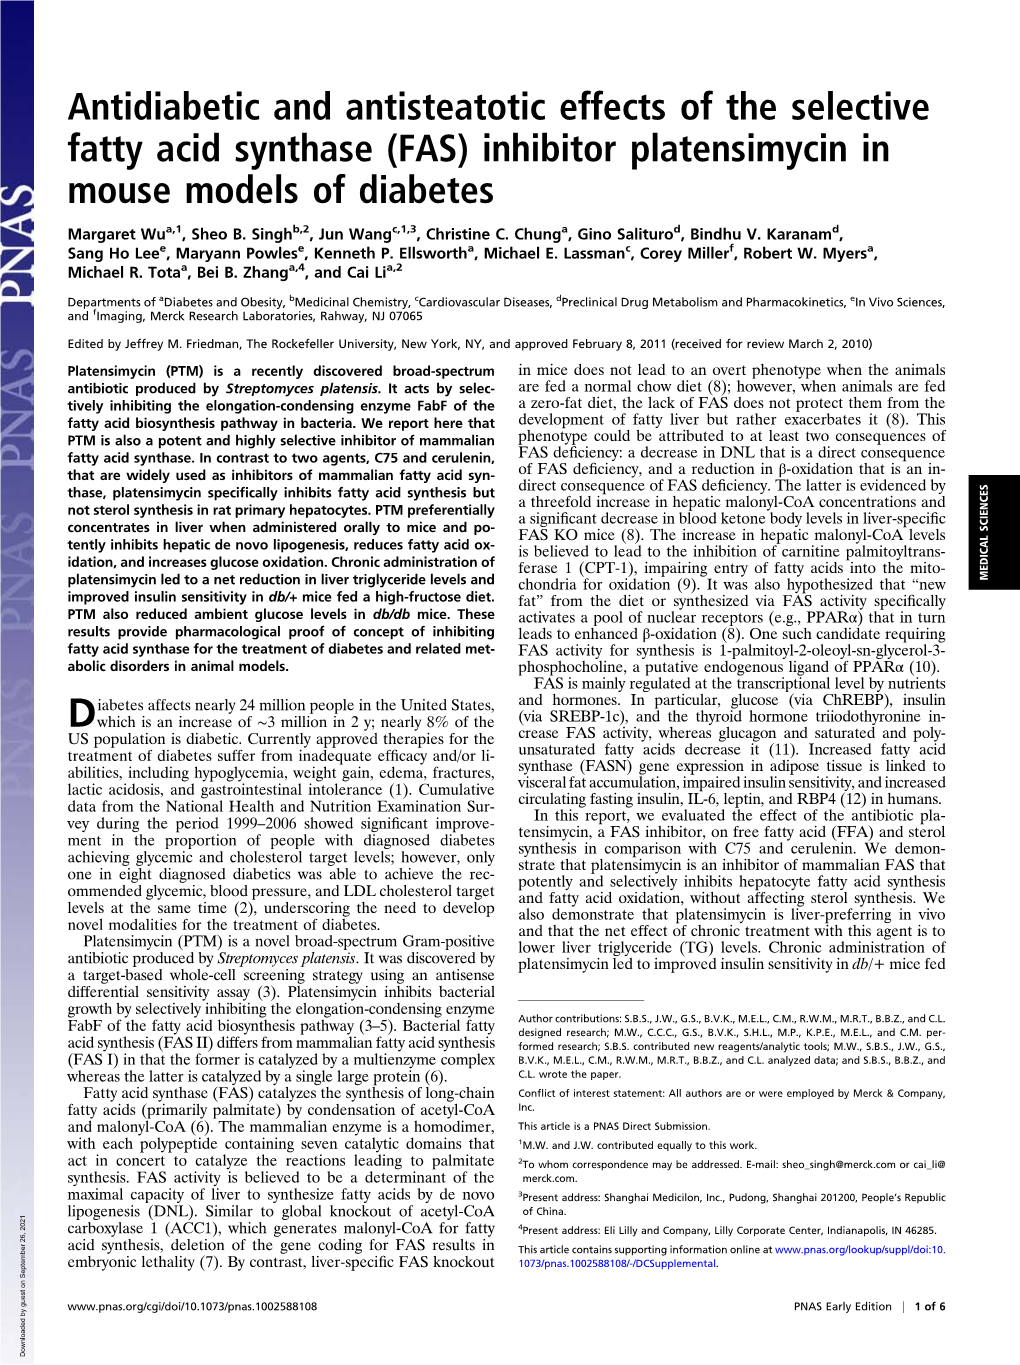 Antidiabetic and Antisteatotic Effects of the Selective Fatty Acid Synthase (FAS) Inhibitor Platensimycin in Mouse Models of Diabetes